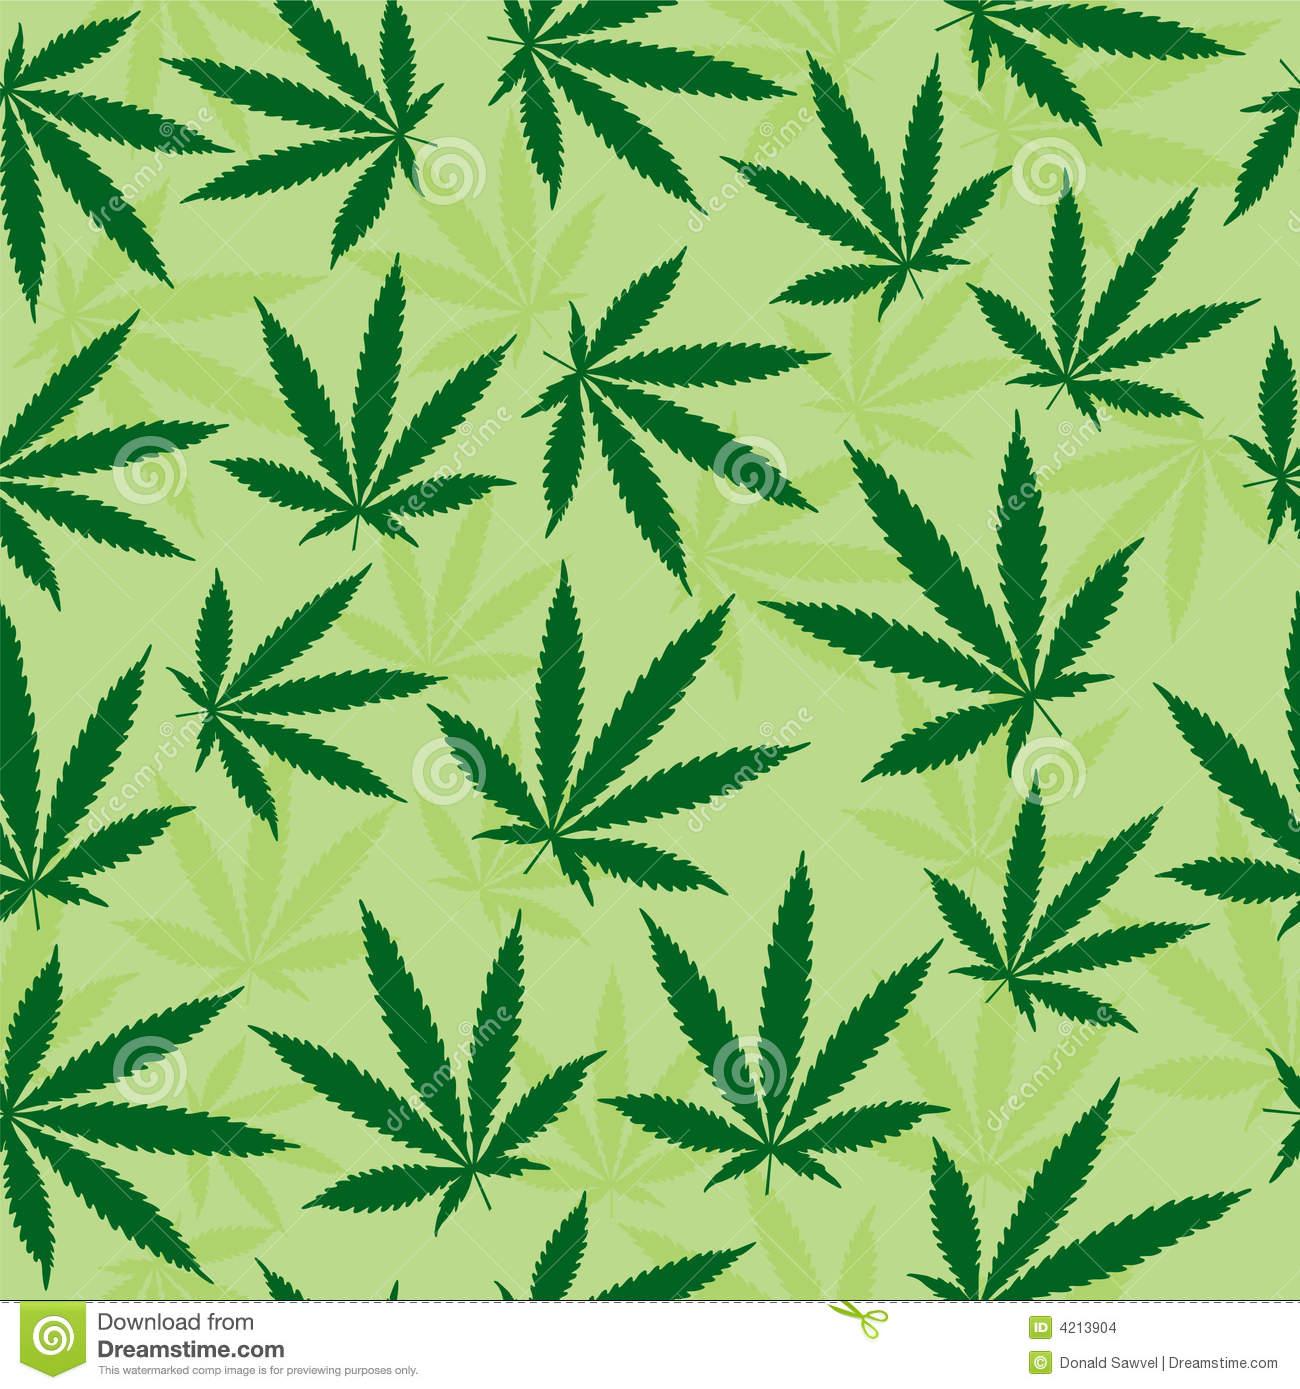 Weed Leaf Background HD Wallpaper On